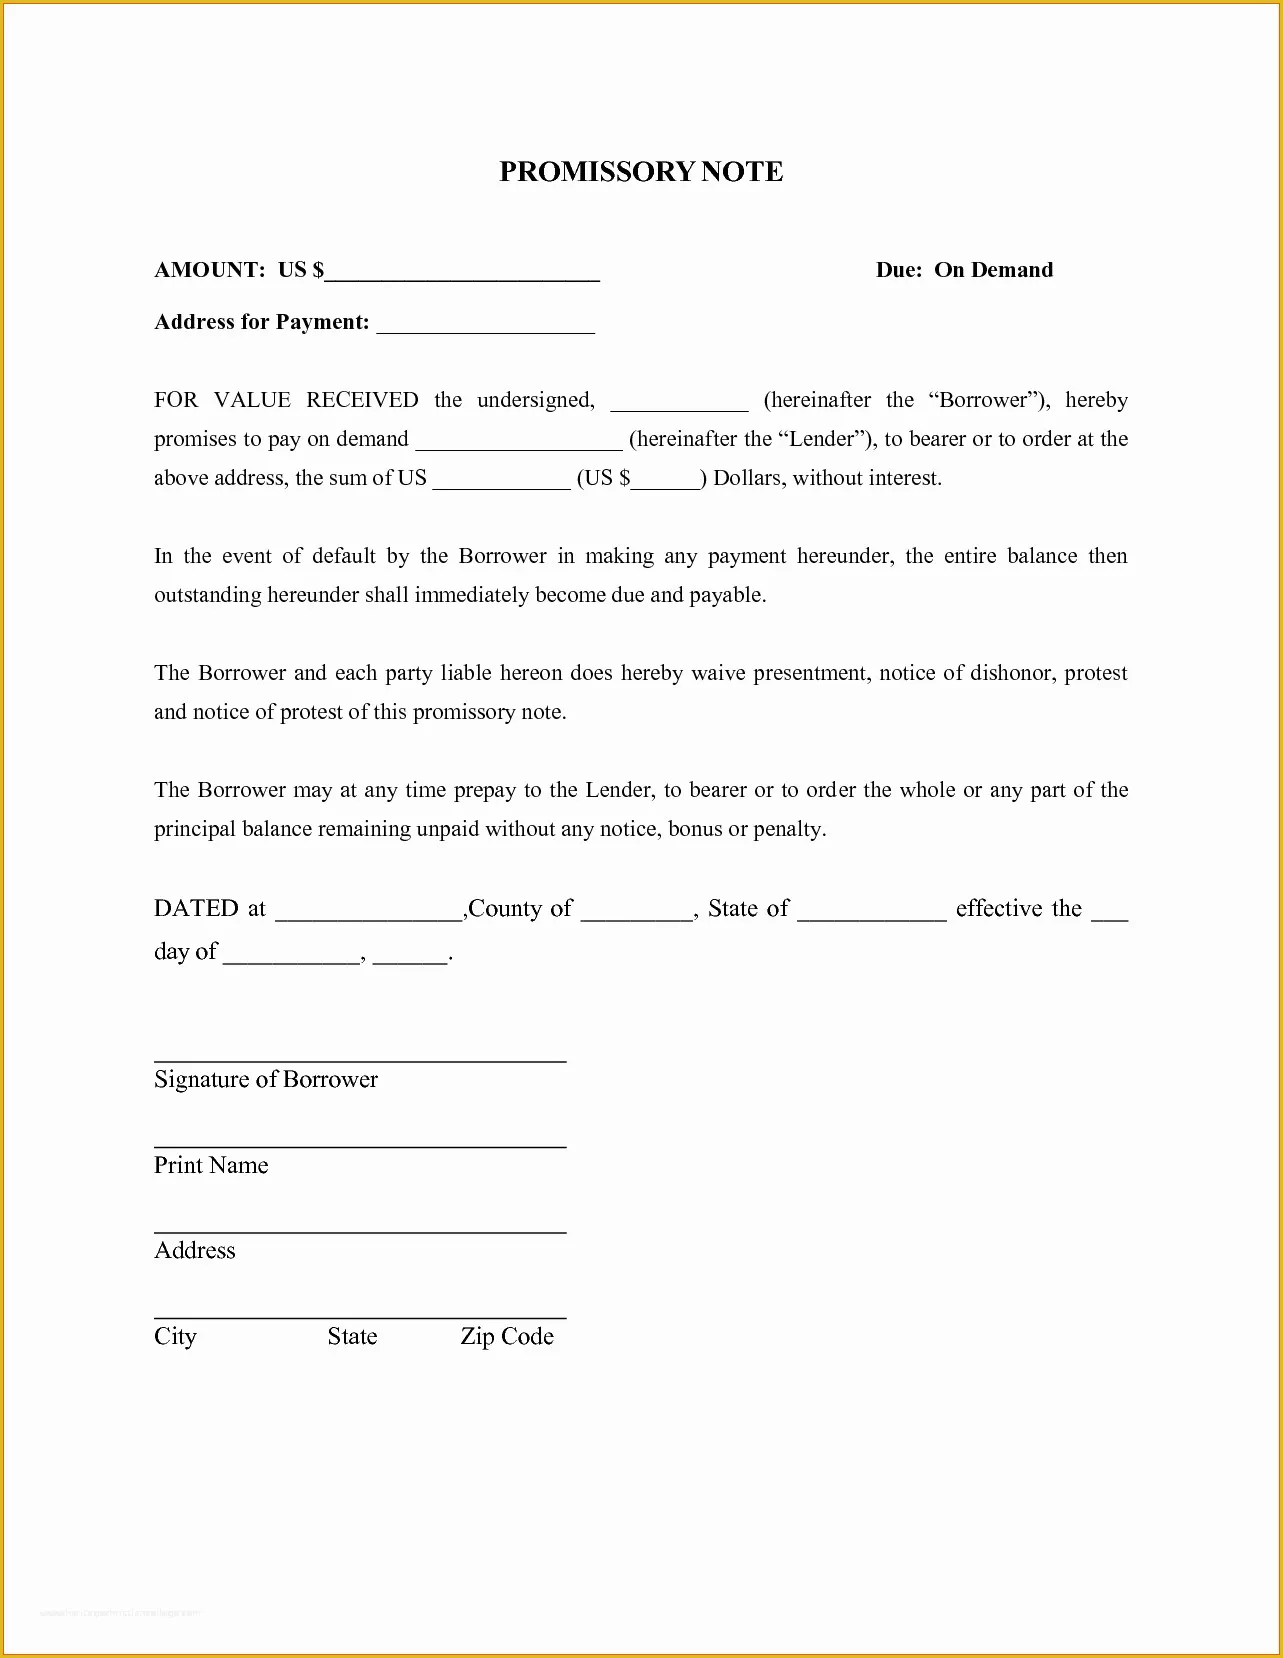 Free Promissory Note Template Of Simple Promissory Note forms Idealstalist